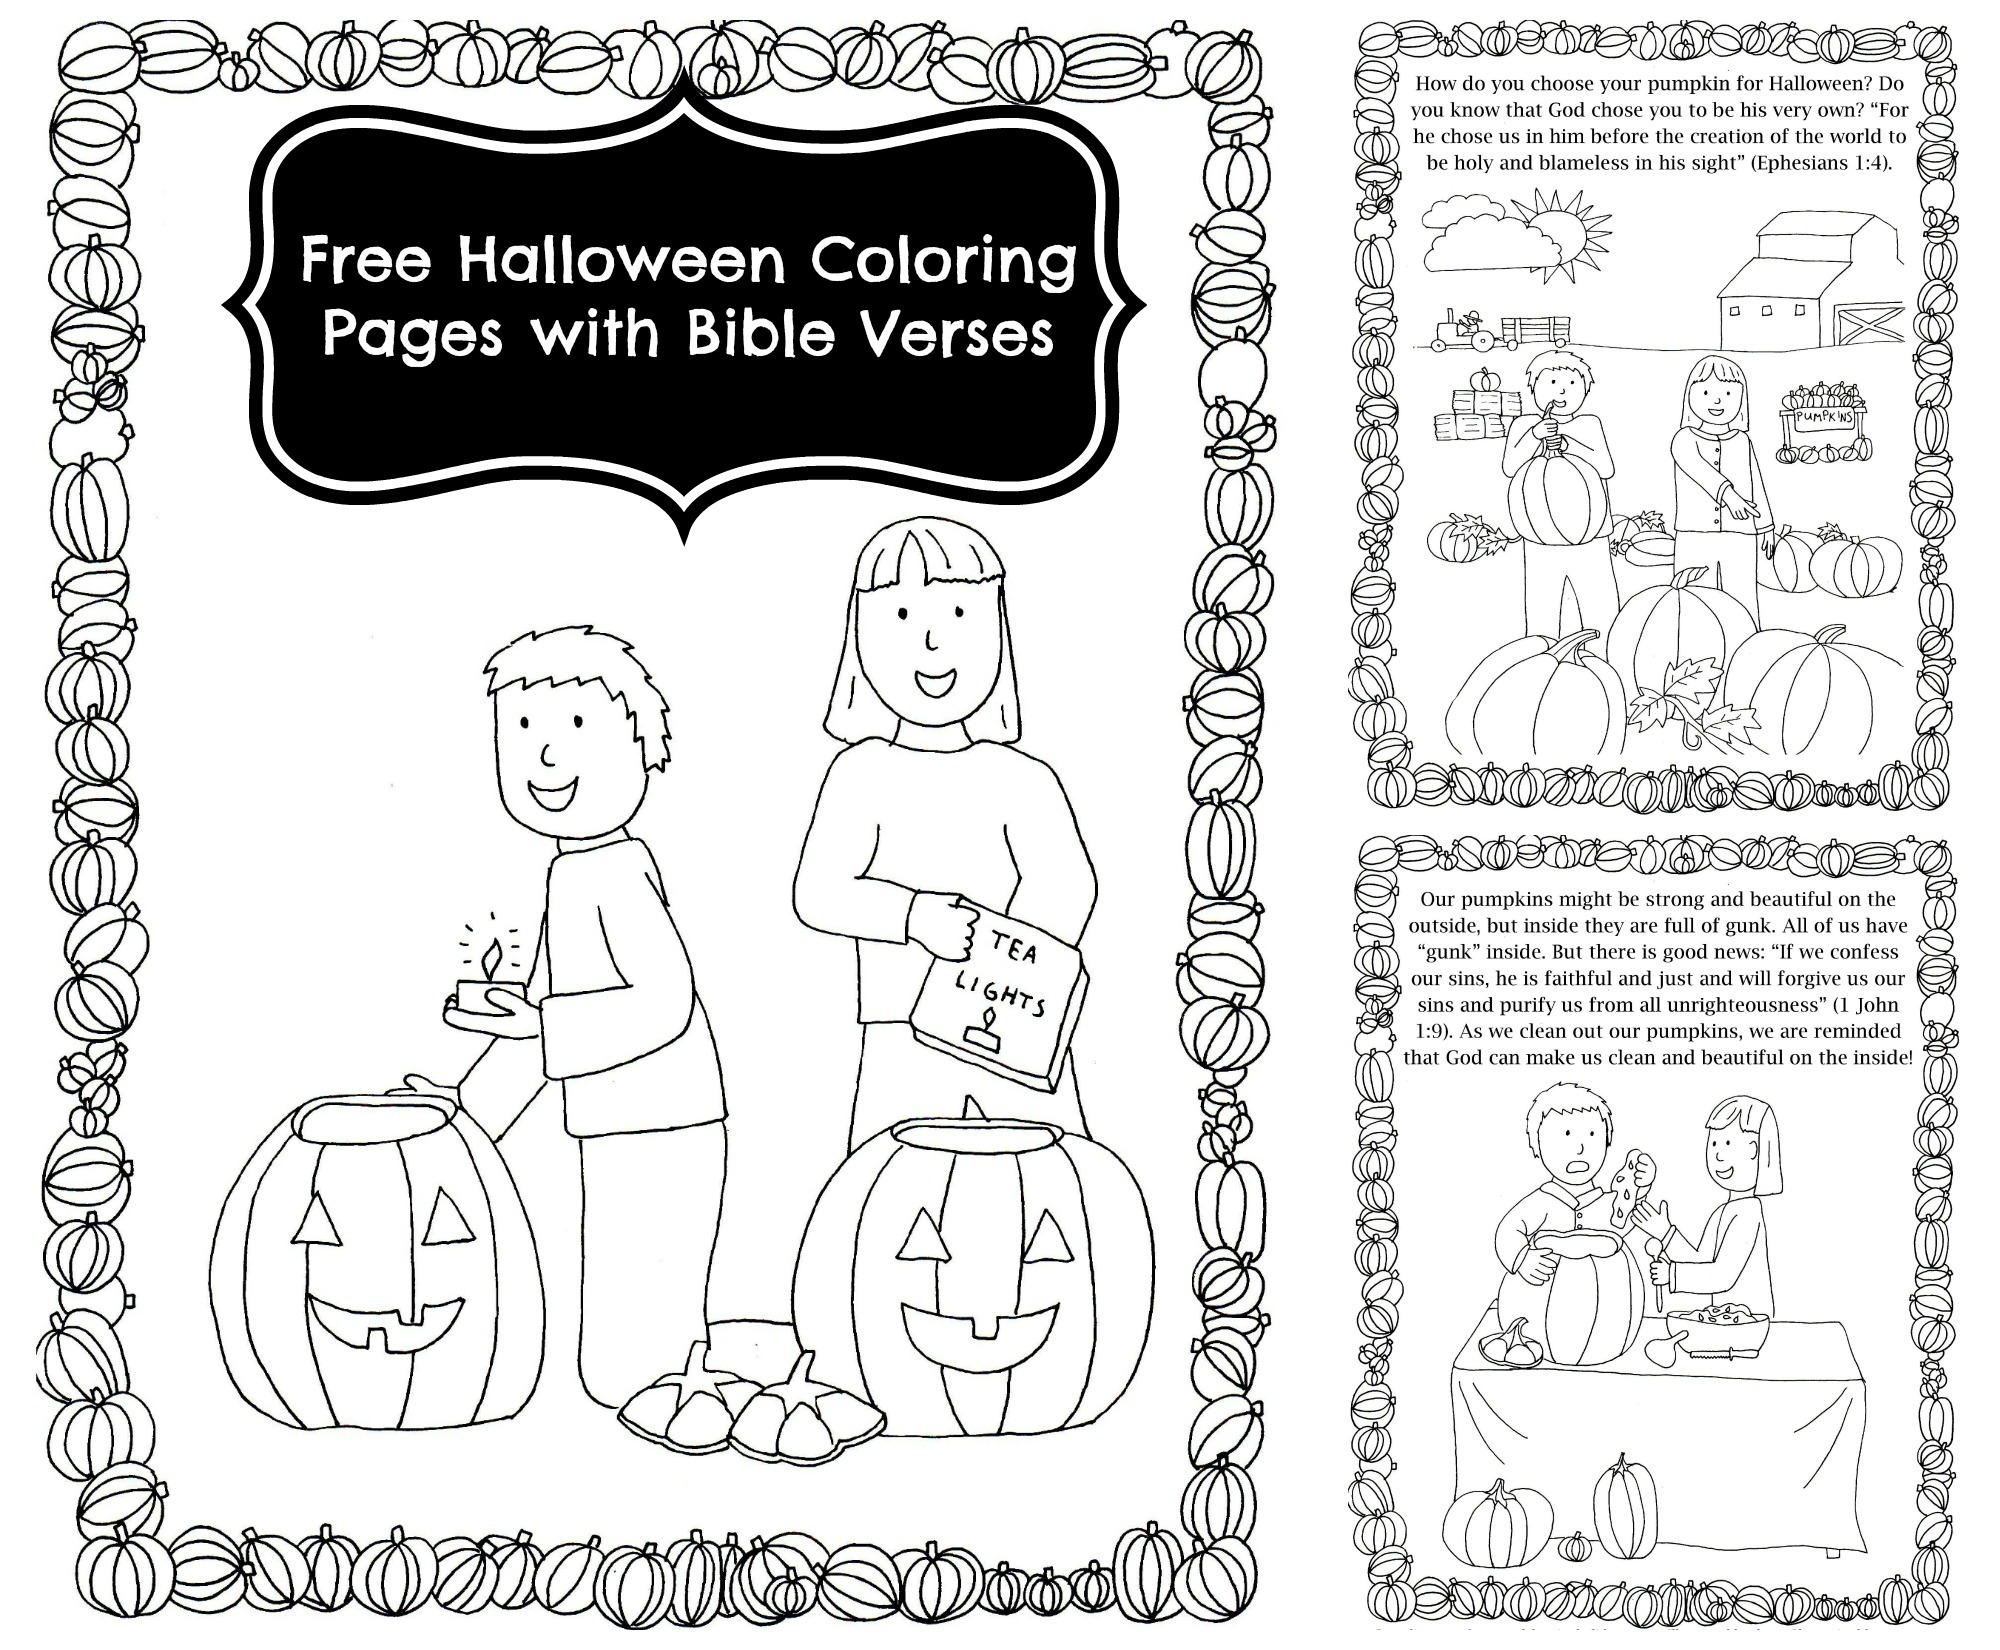 Pumpkin Carving Coloring Pages Bible Verses Halloween Christian